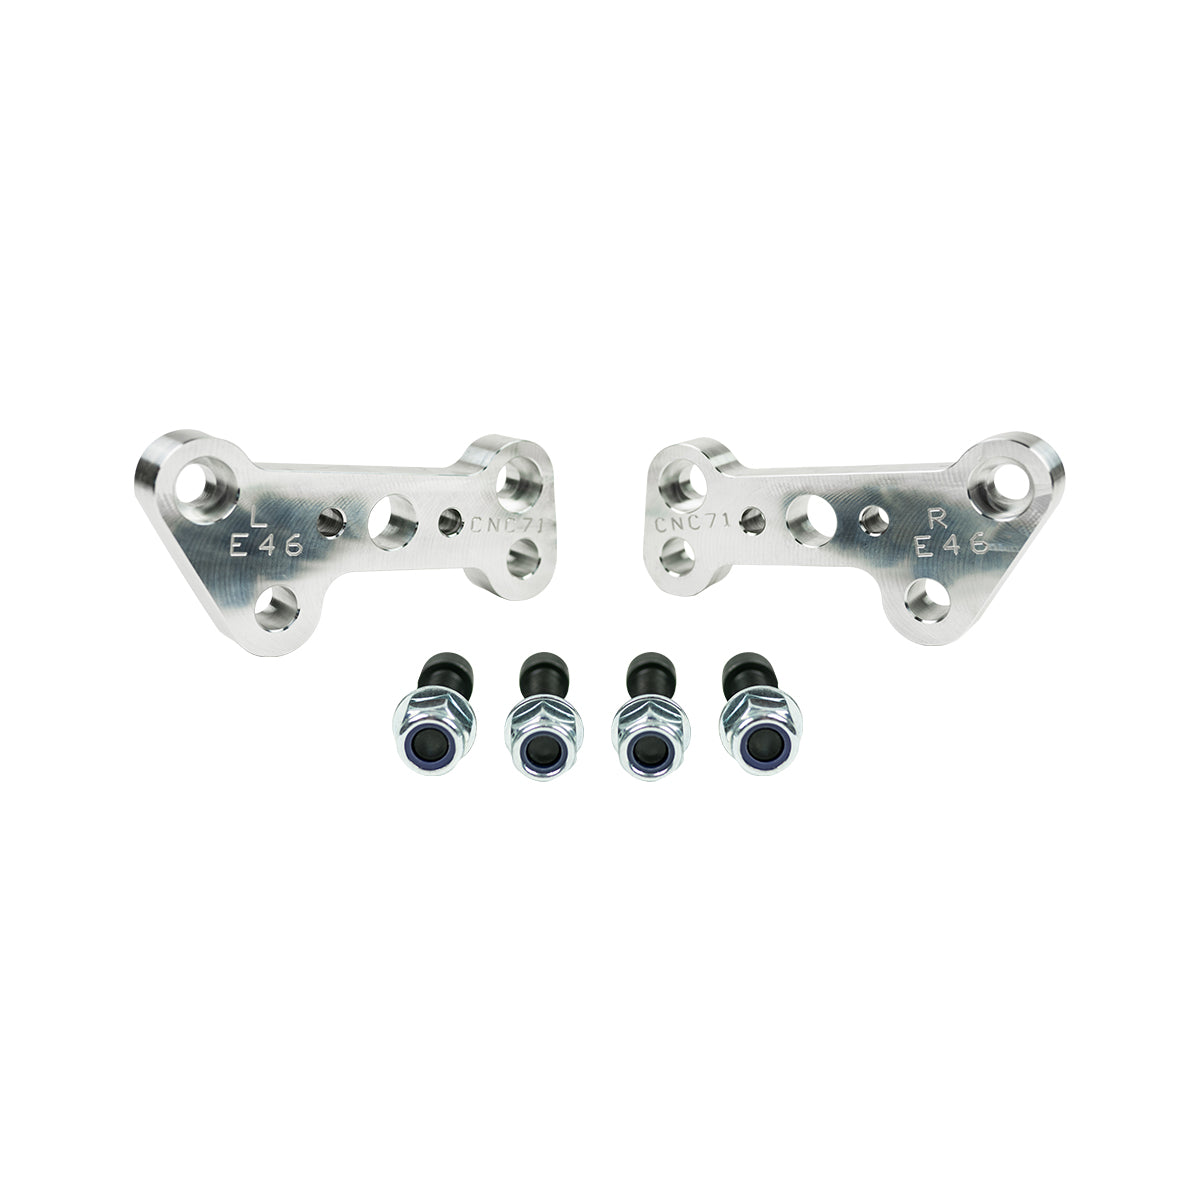 CNC71 - DRIFT ADAPTERS FOR BMW E46 - STOCK ARM